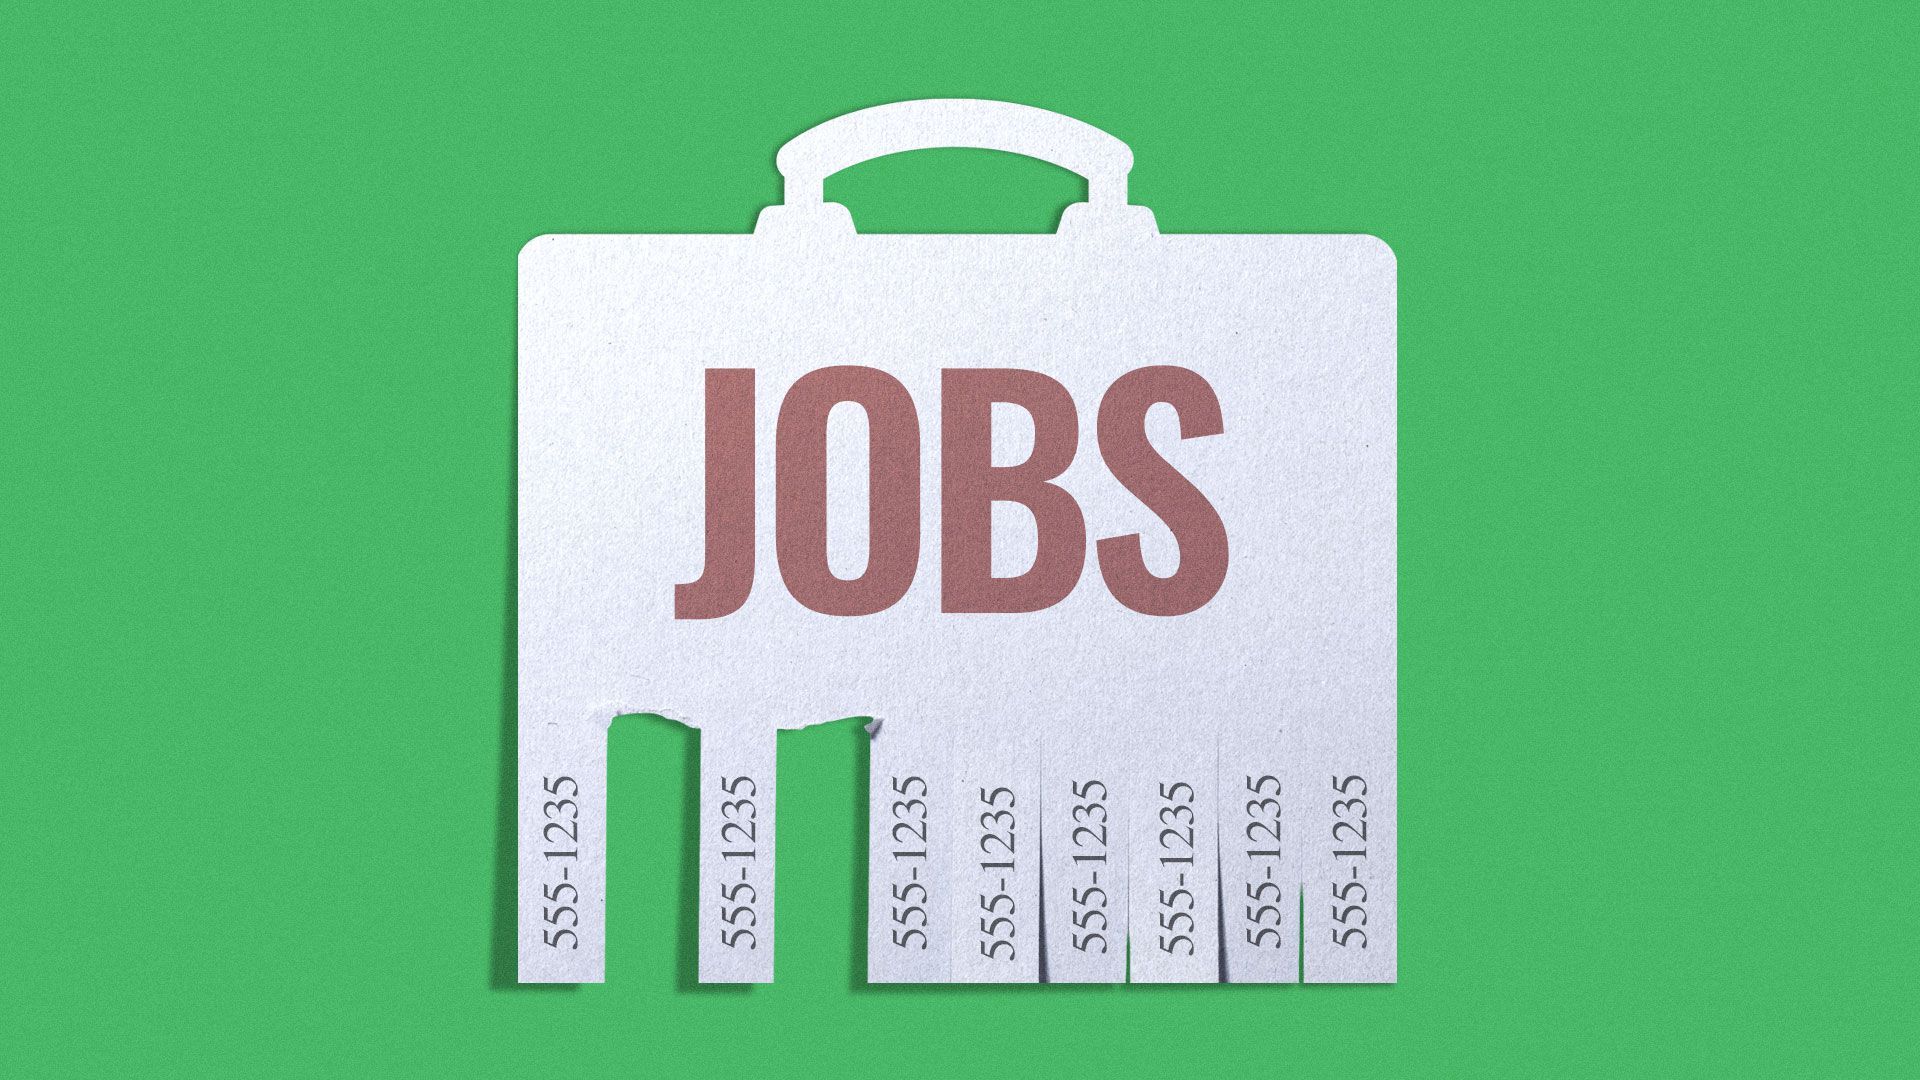 Illustration of a job posting shaped as a briefcase with two strips missing